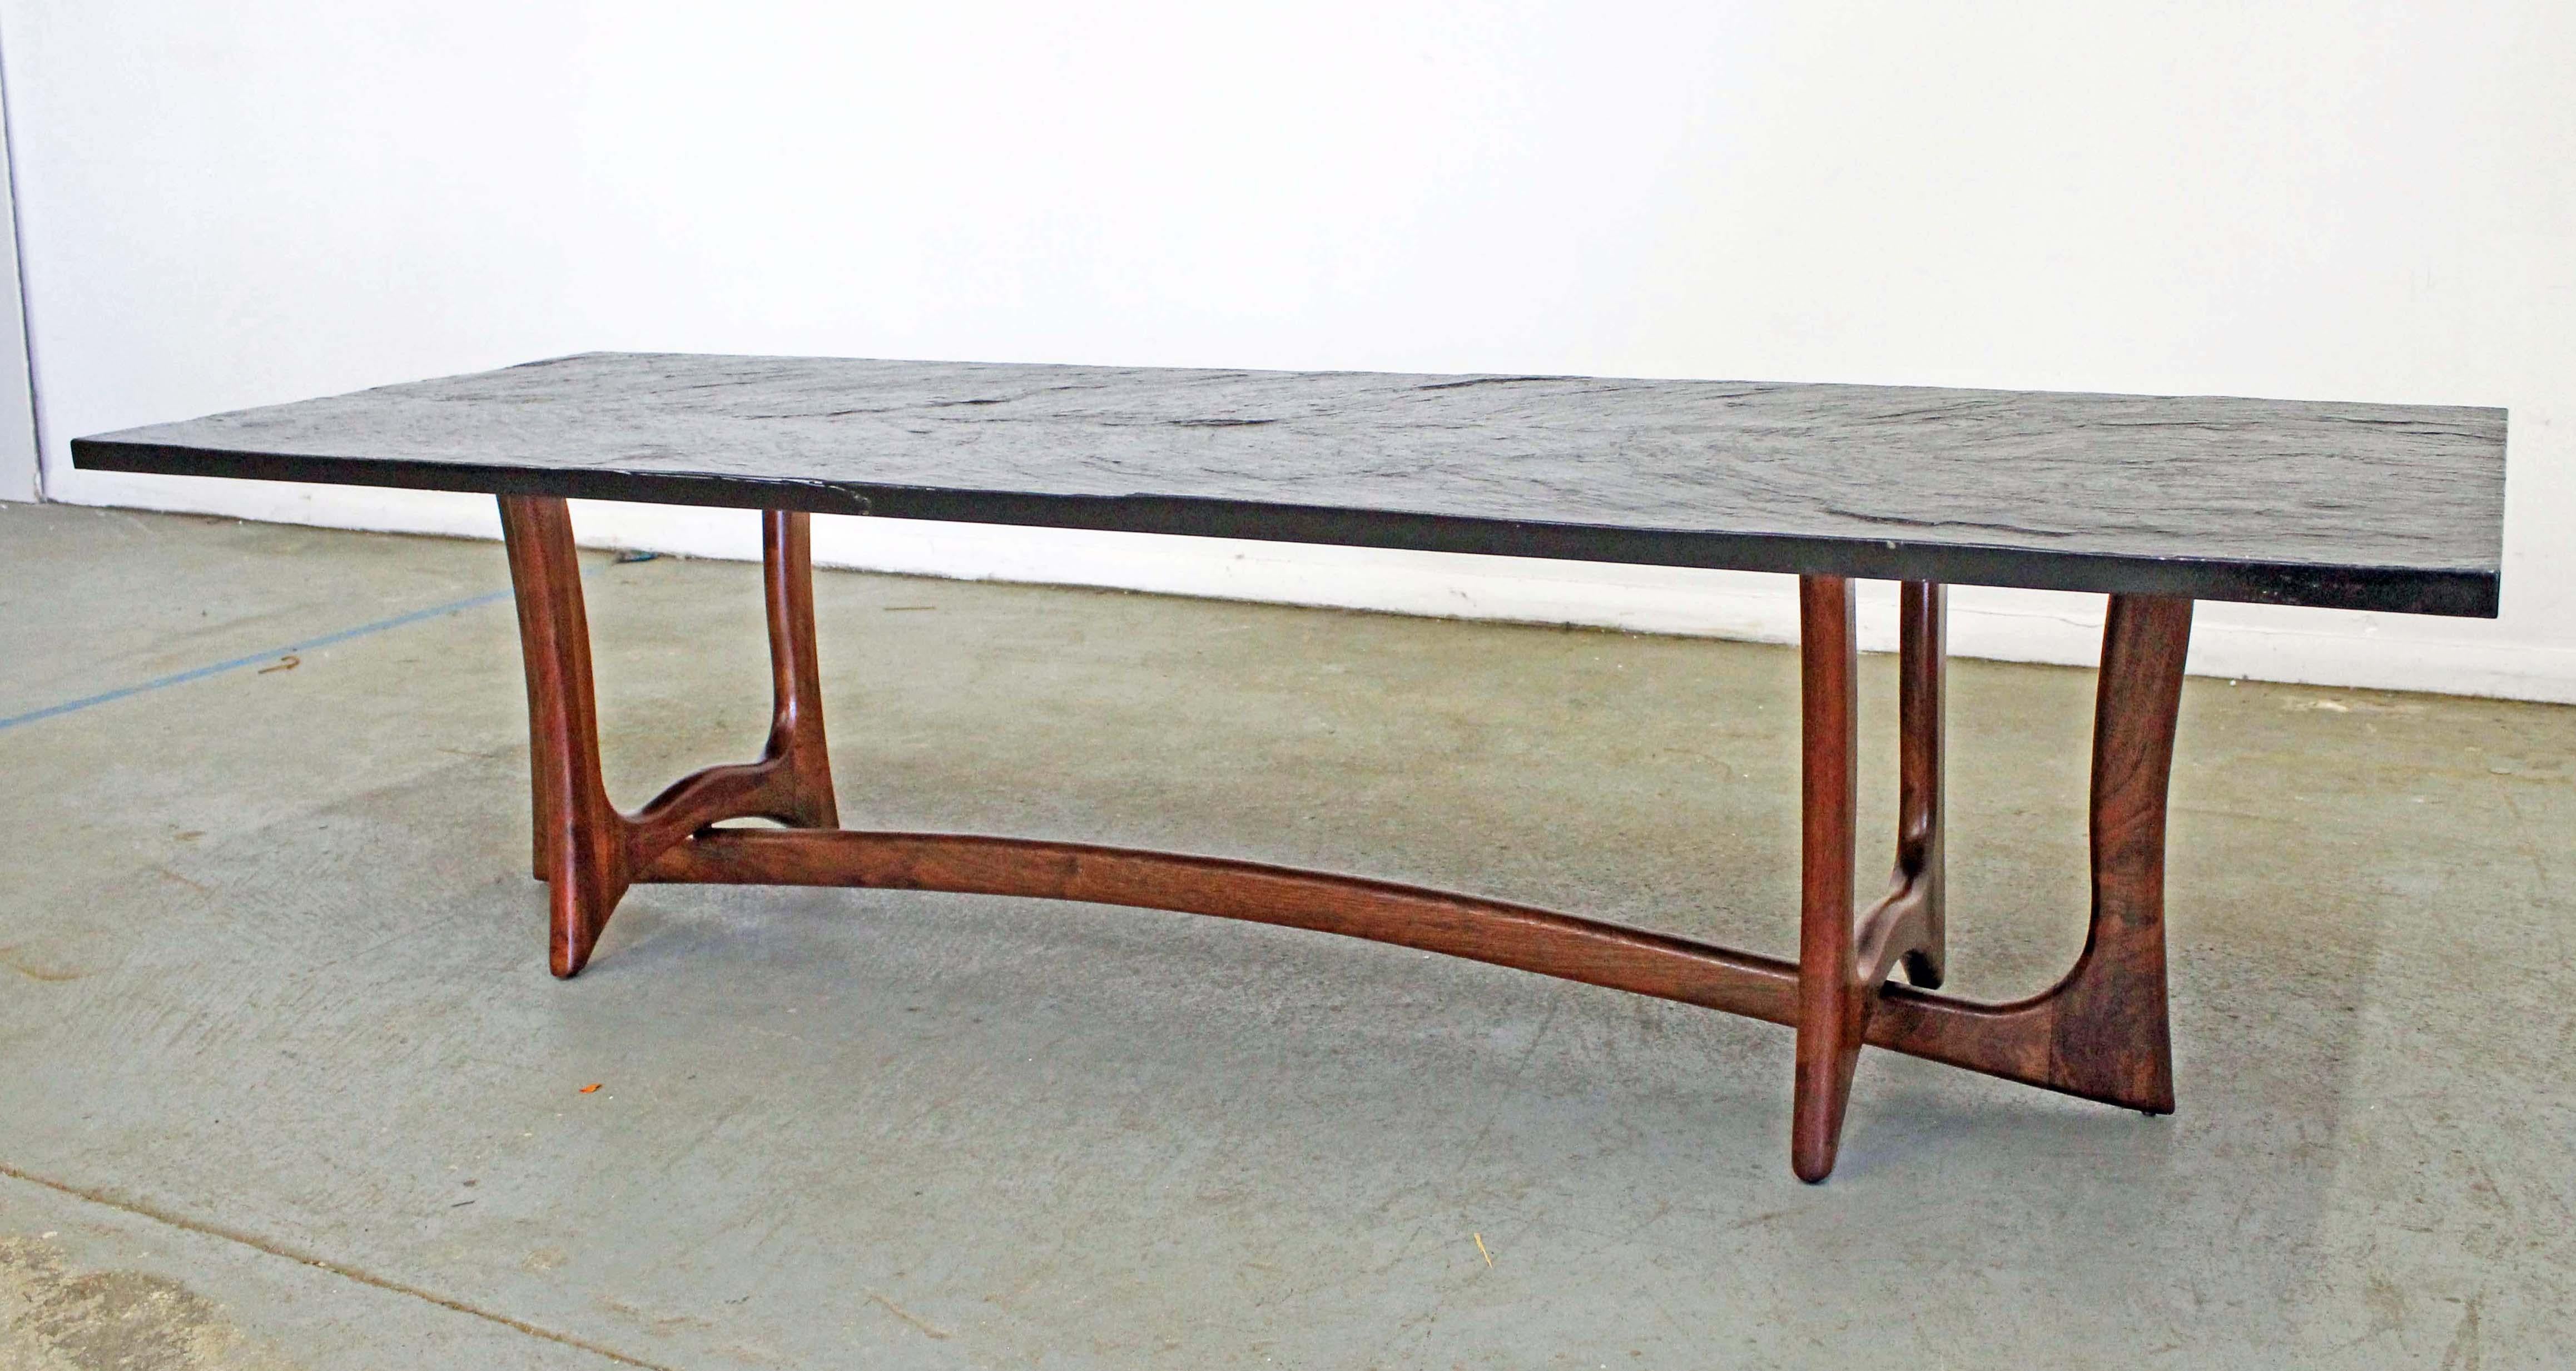 Offered is an authentic Adrian Pearsall coffee table with a gorgeous sculptural wooden base and slate top. It was designed by Adrian Pearsall for Craft Associates. It is in good condition for its age showing normal wear. Slate top has some stains